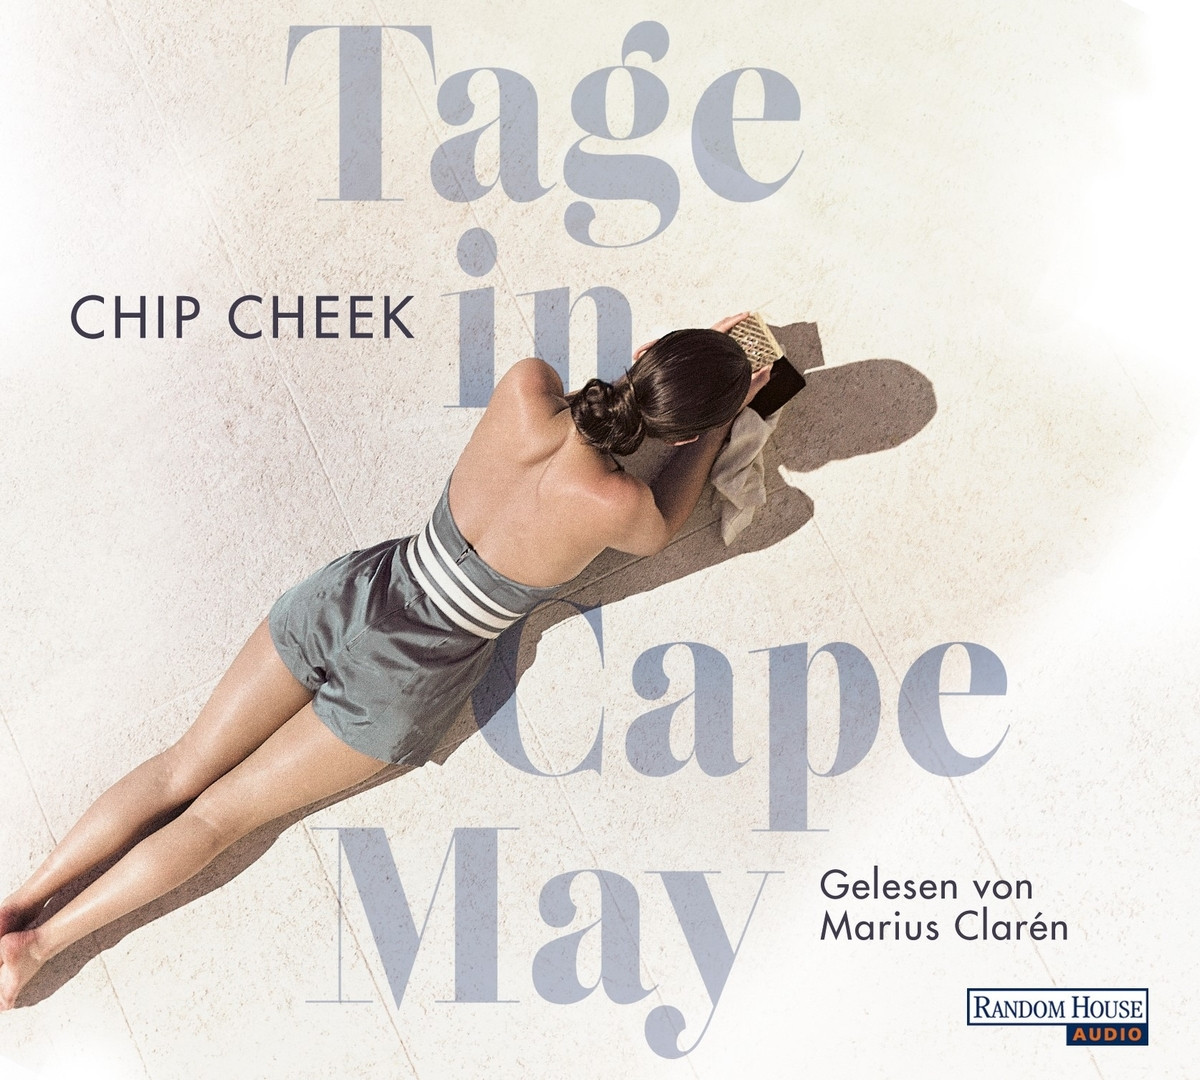 Chip Cheek - Tage in Cape May